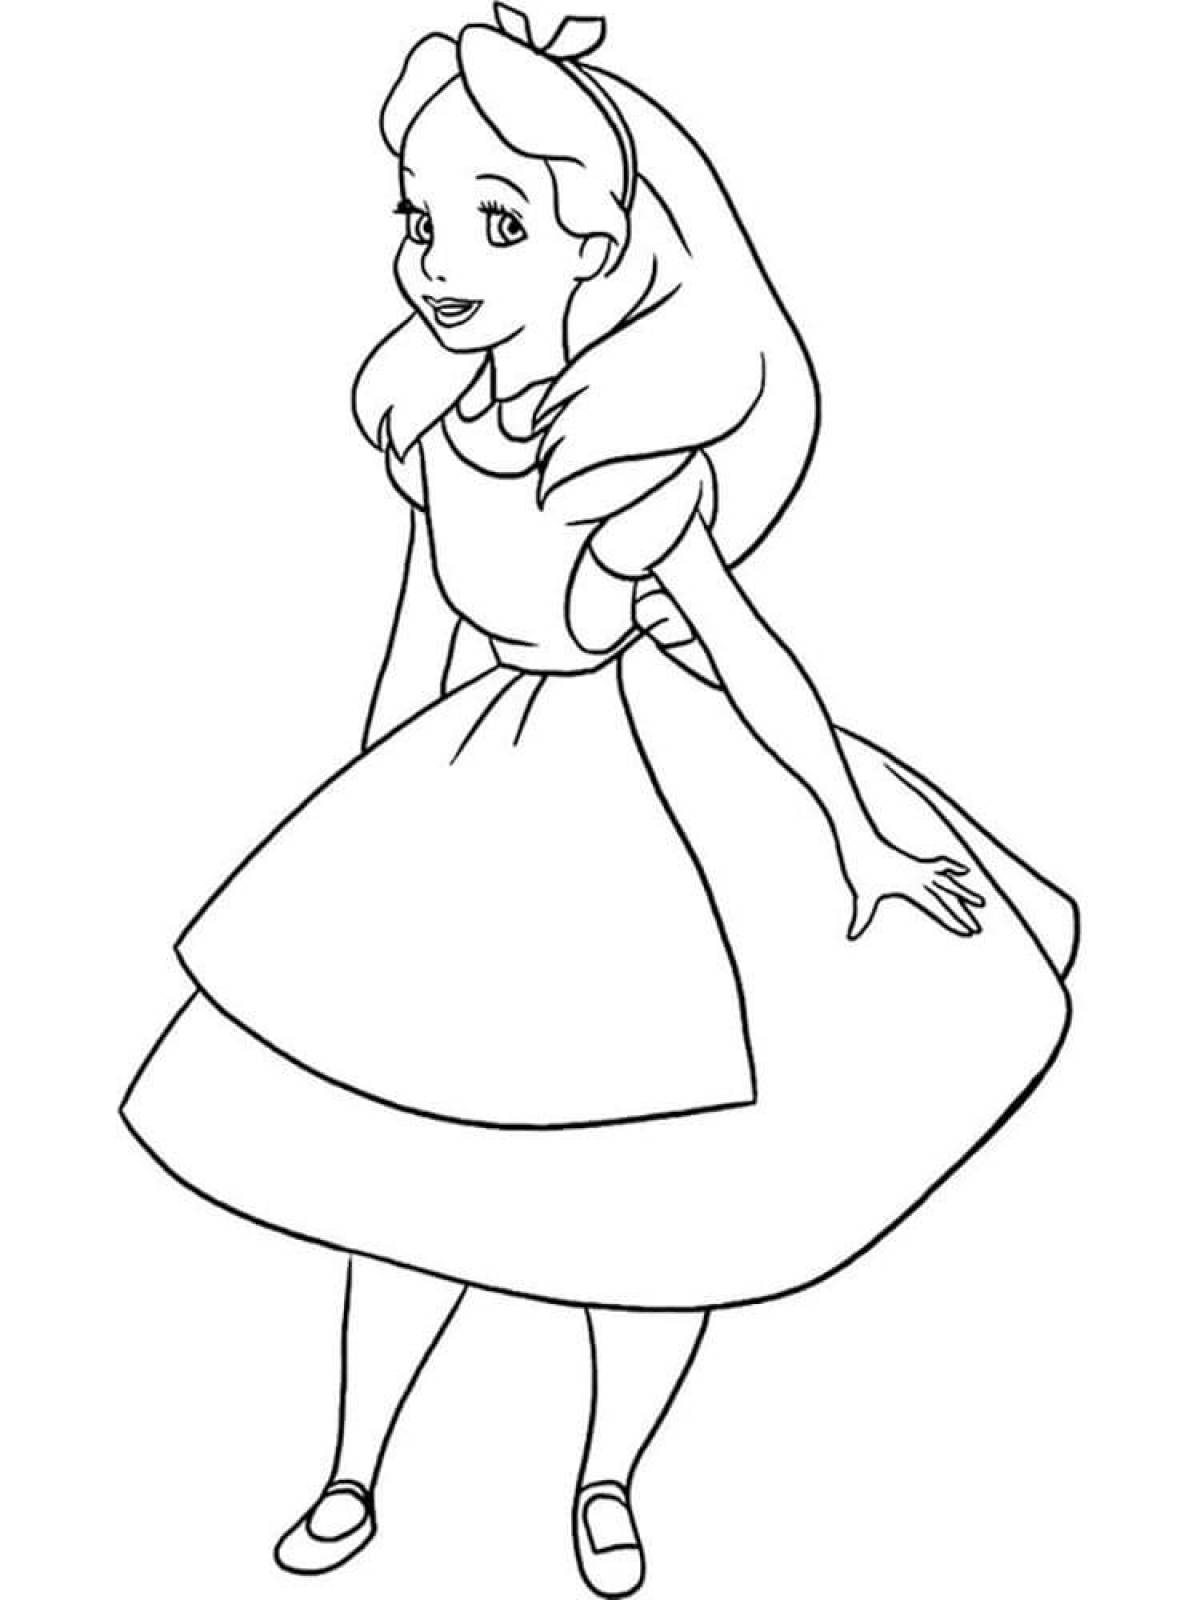 Playful alice find coloring page